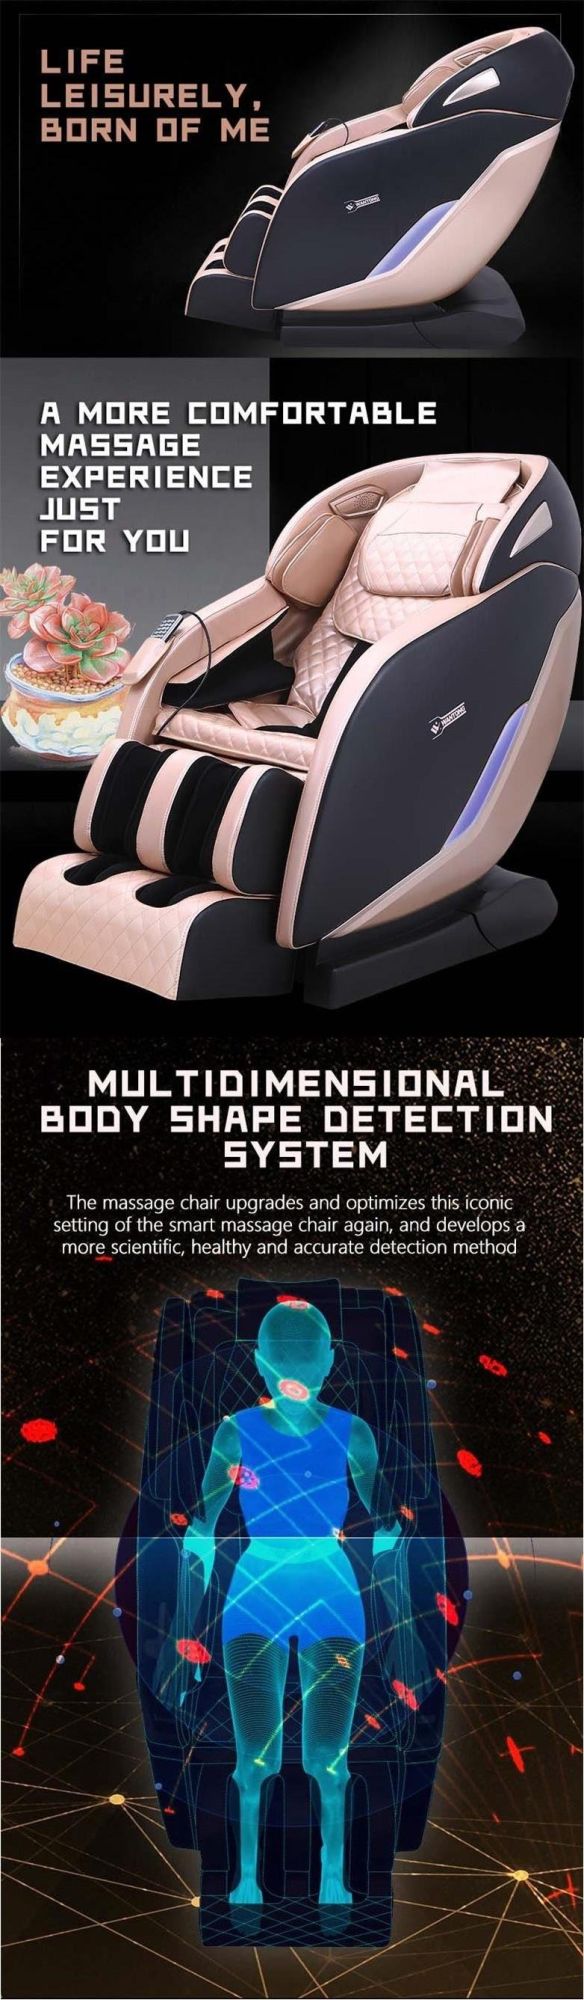 Best Price Massager Product 3D Full Body Home Use Electric Massage Chair